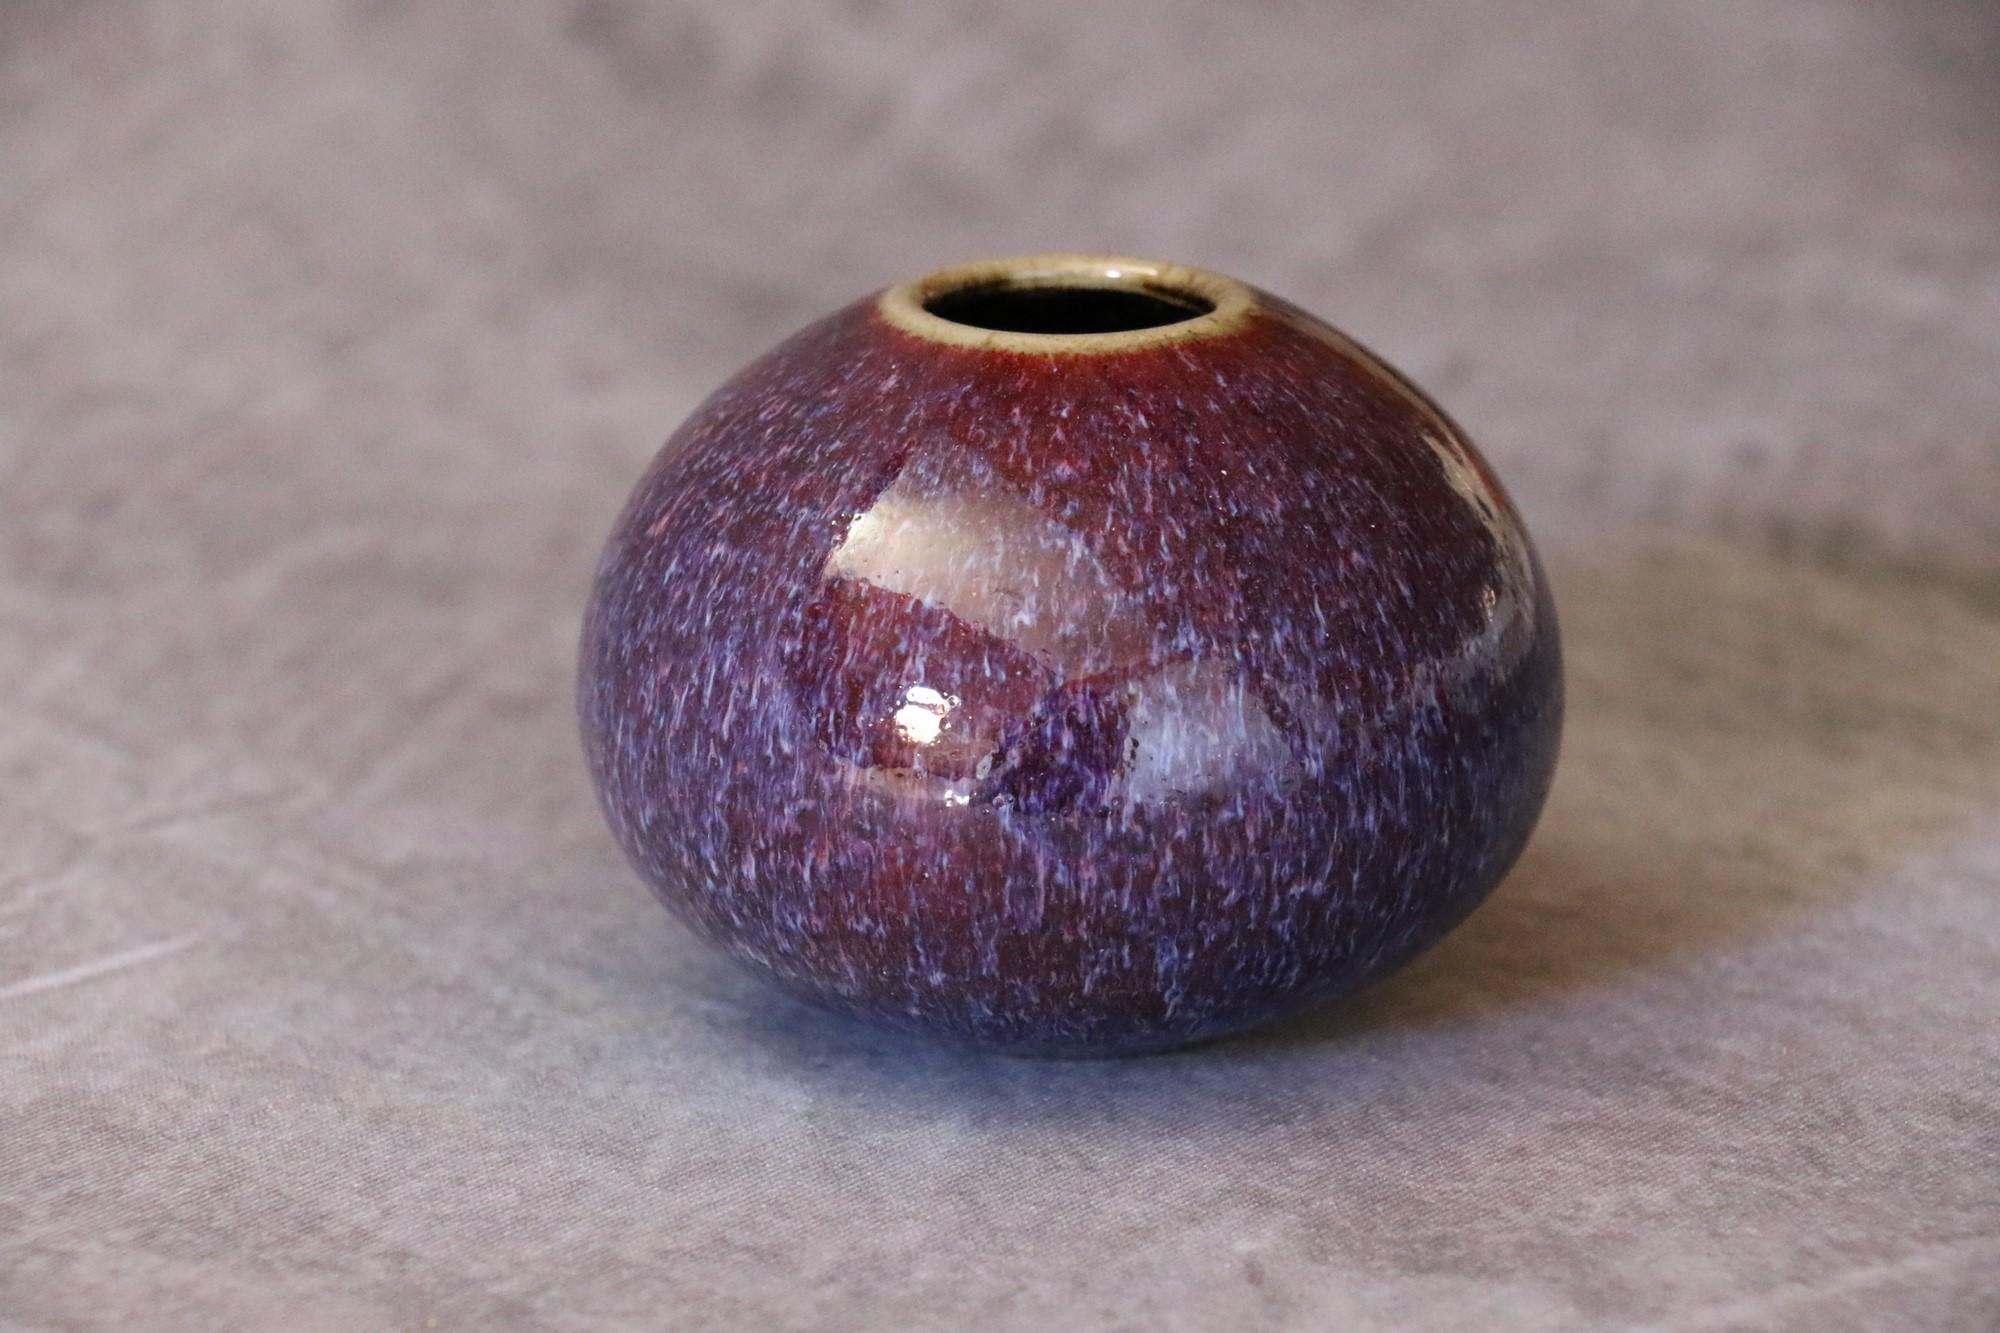 French ceramic ball vase by Marc Uzan - circa 2000
Delicate enamelling in shades of purple - Ring neck.
Signed under the base.
Very good condition.

--------------------------
Born in Sousse, Tunisia in 1955, Marc Uzan discovered modelling at